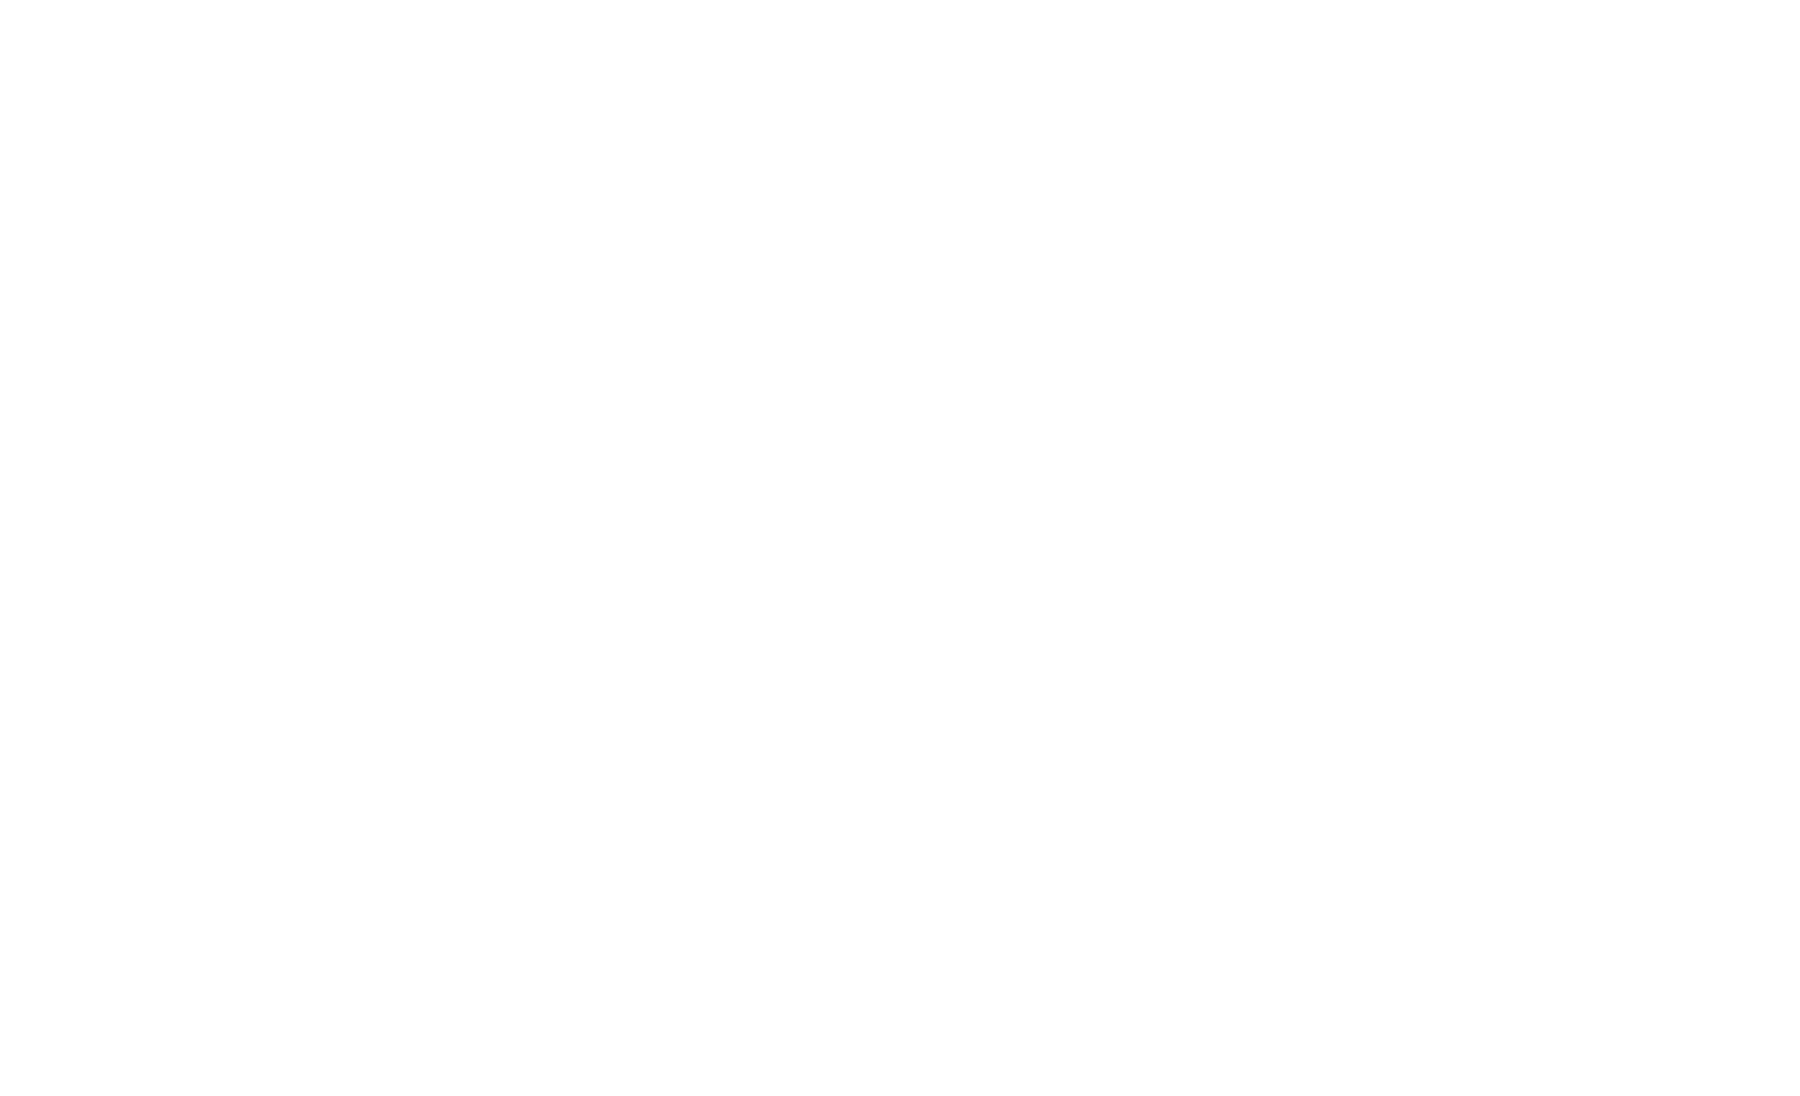 Snowdonia for Science - Dates